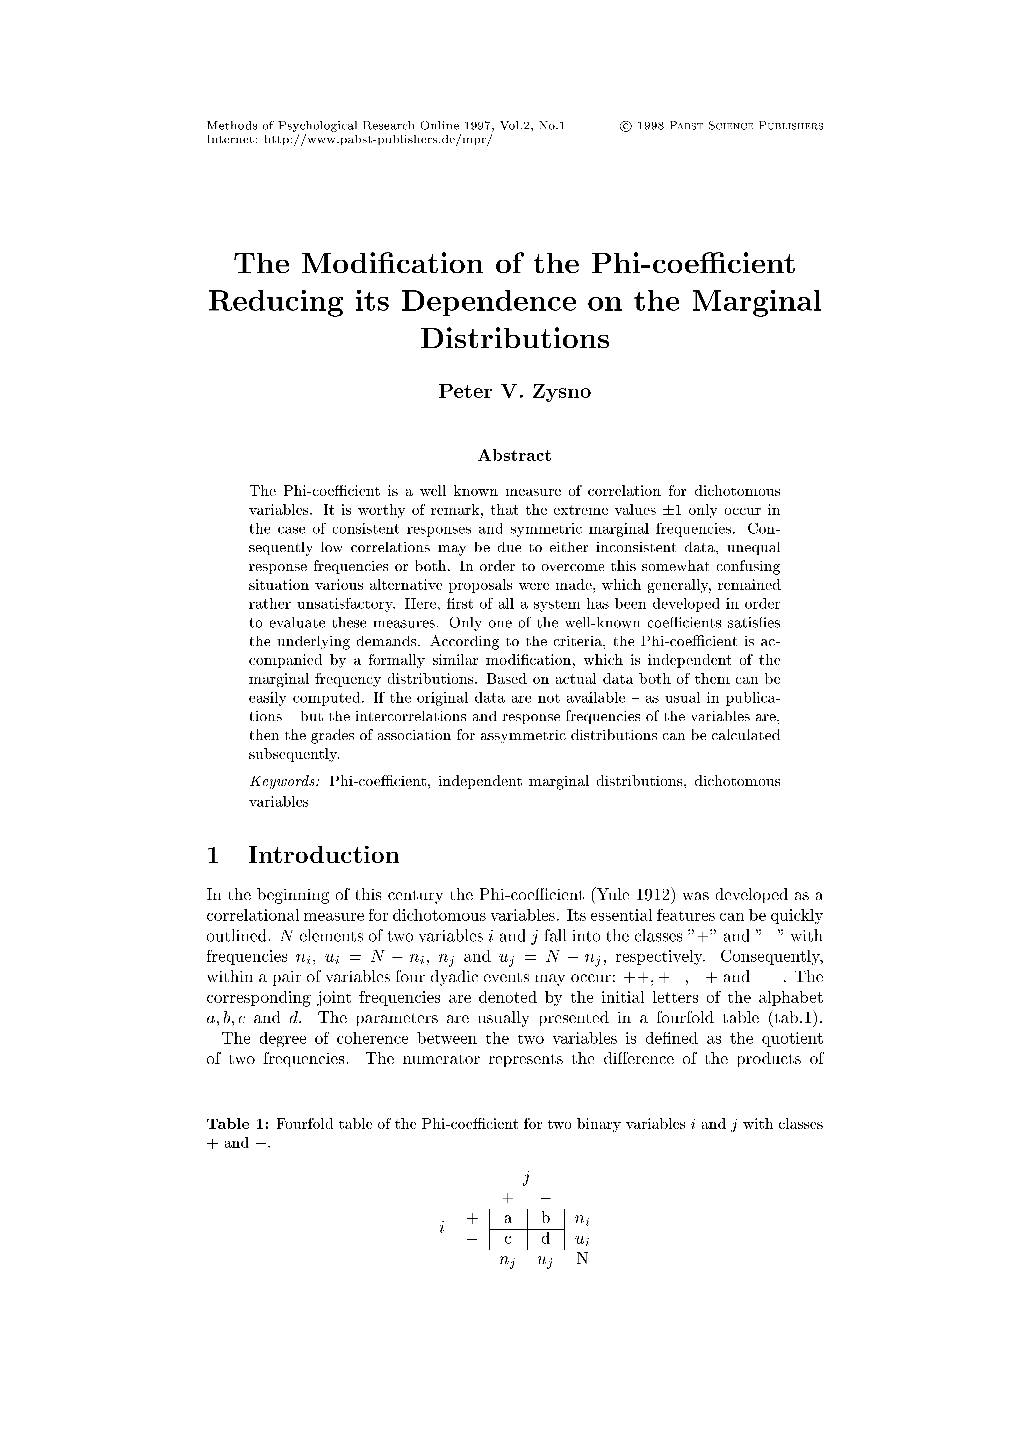 The Modification of the Phi-Coefficient Reducing Its Dependence on The